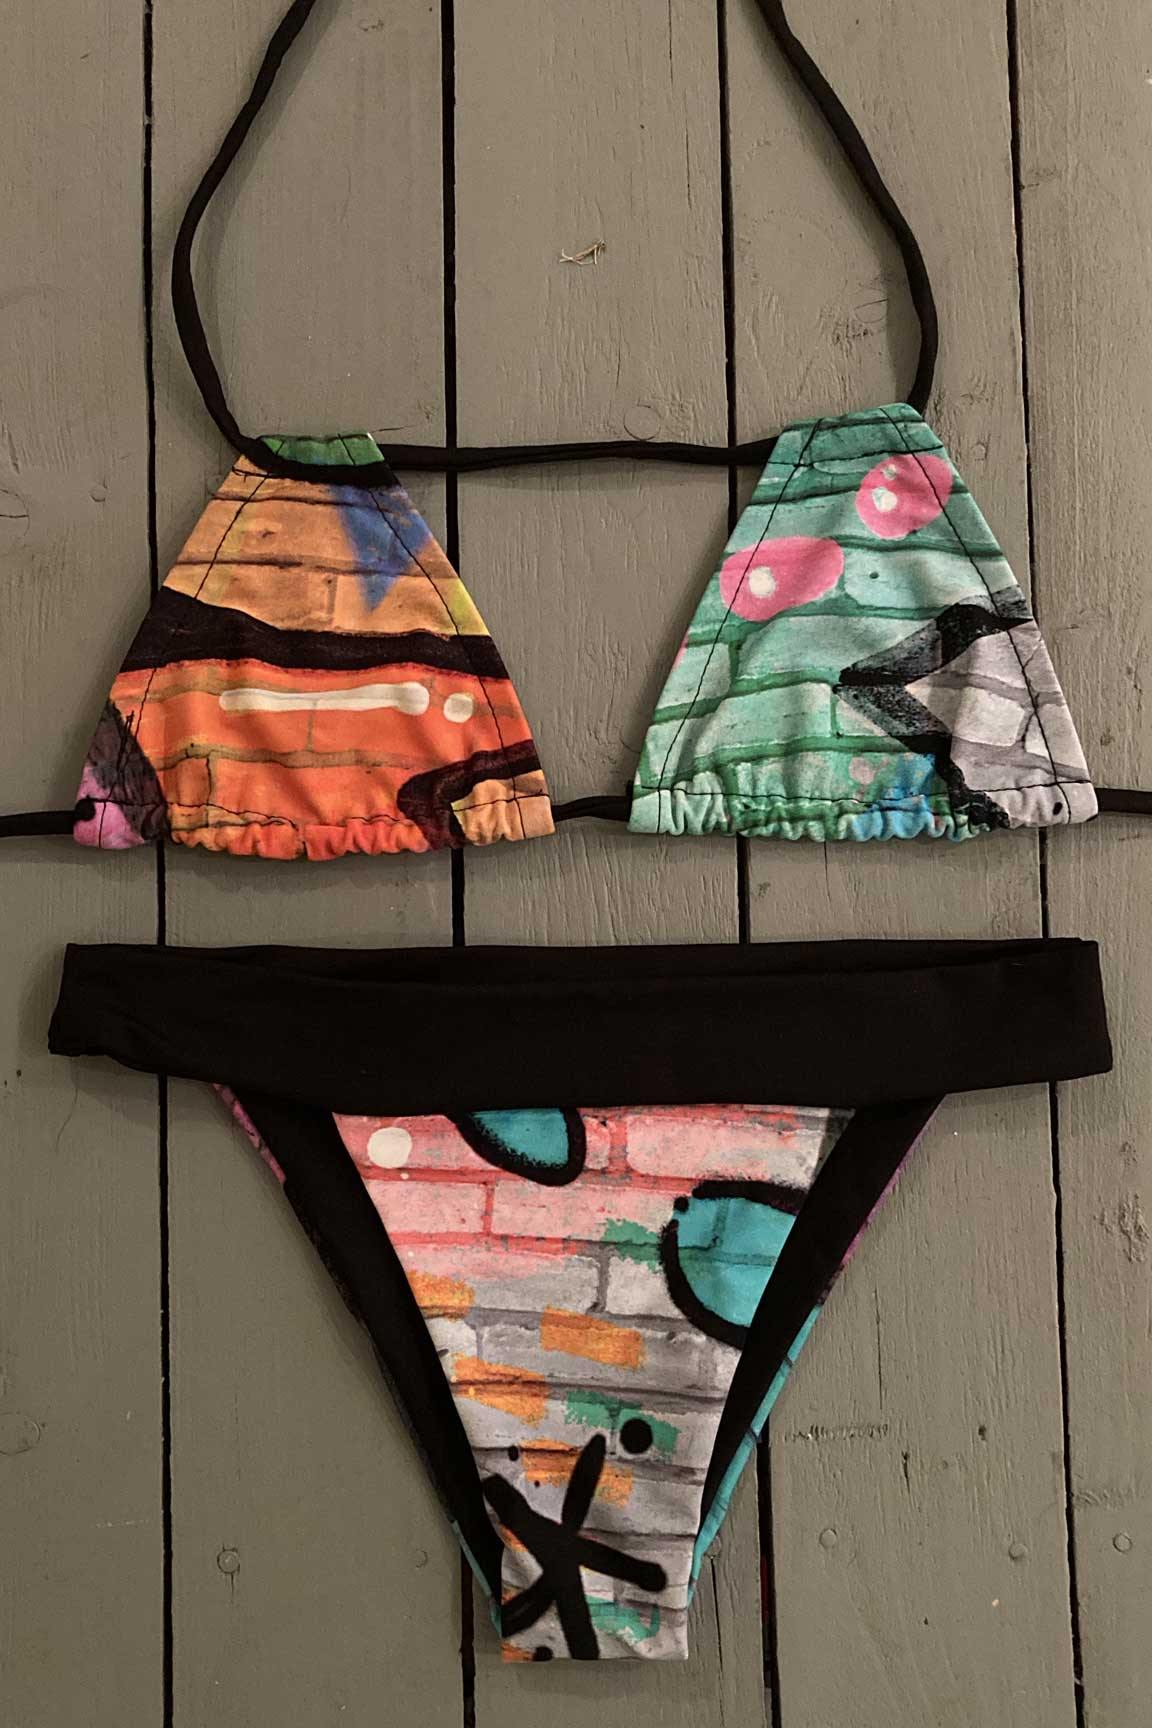 Enjoy days at the beach or pool in this Britto print wide band bikini bottom. This bikini bottom is made with the finest quality of soft and stretchy Lycra to achieve the best fit. Order yours today. @jillesbikinis